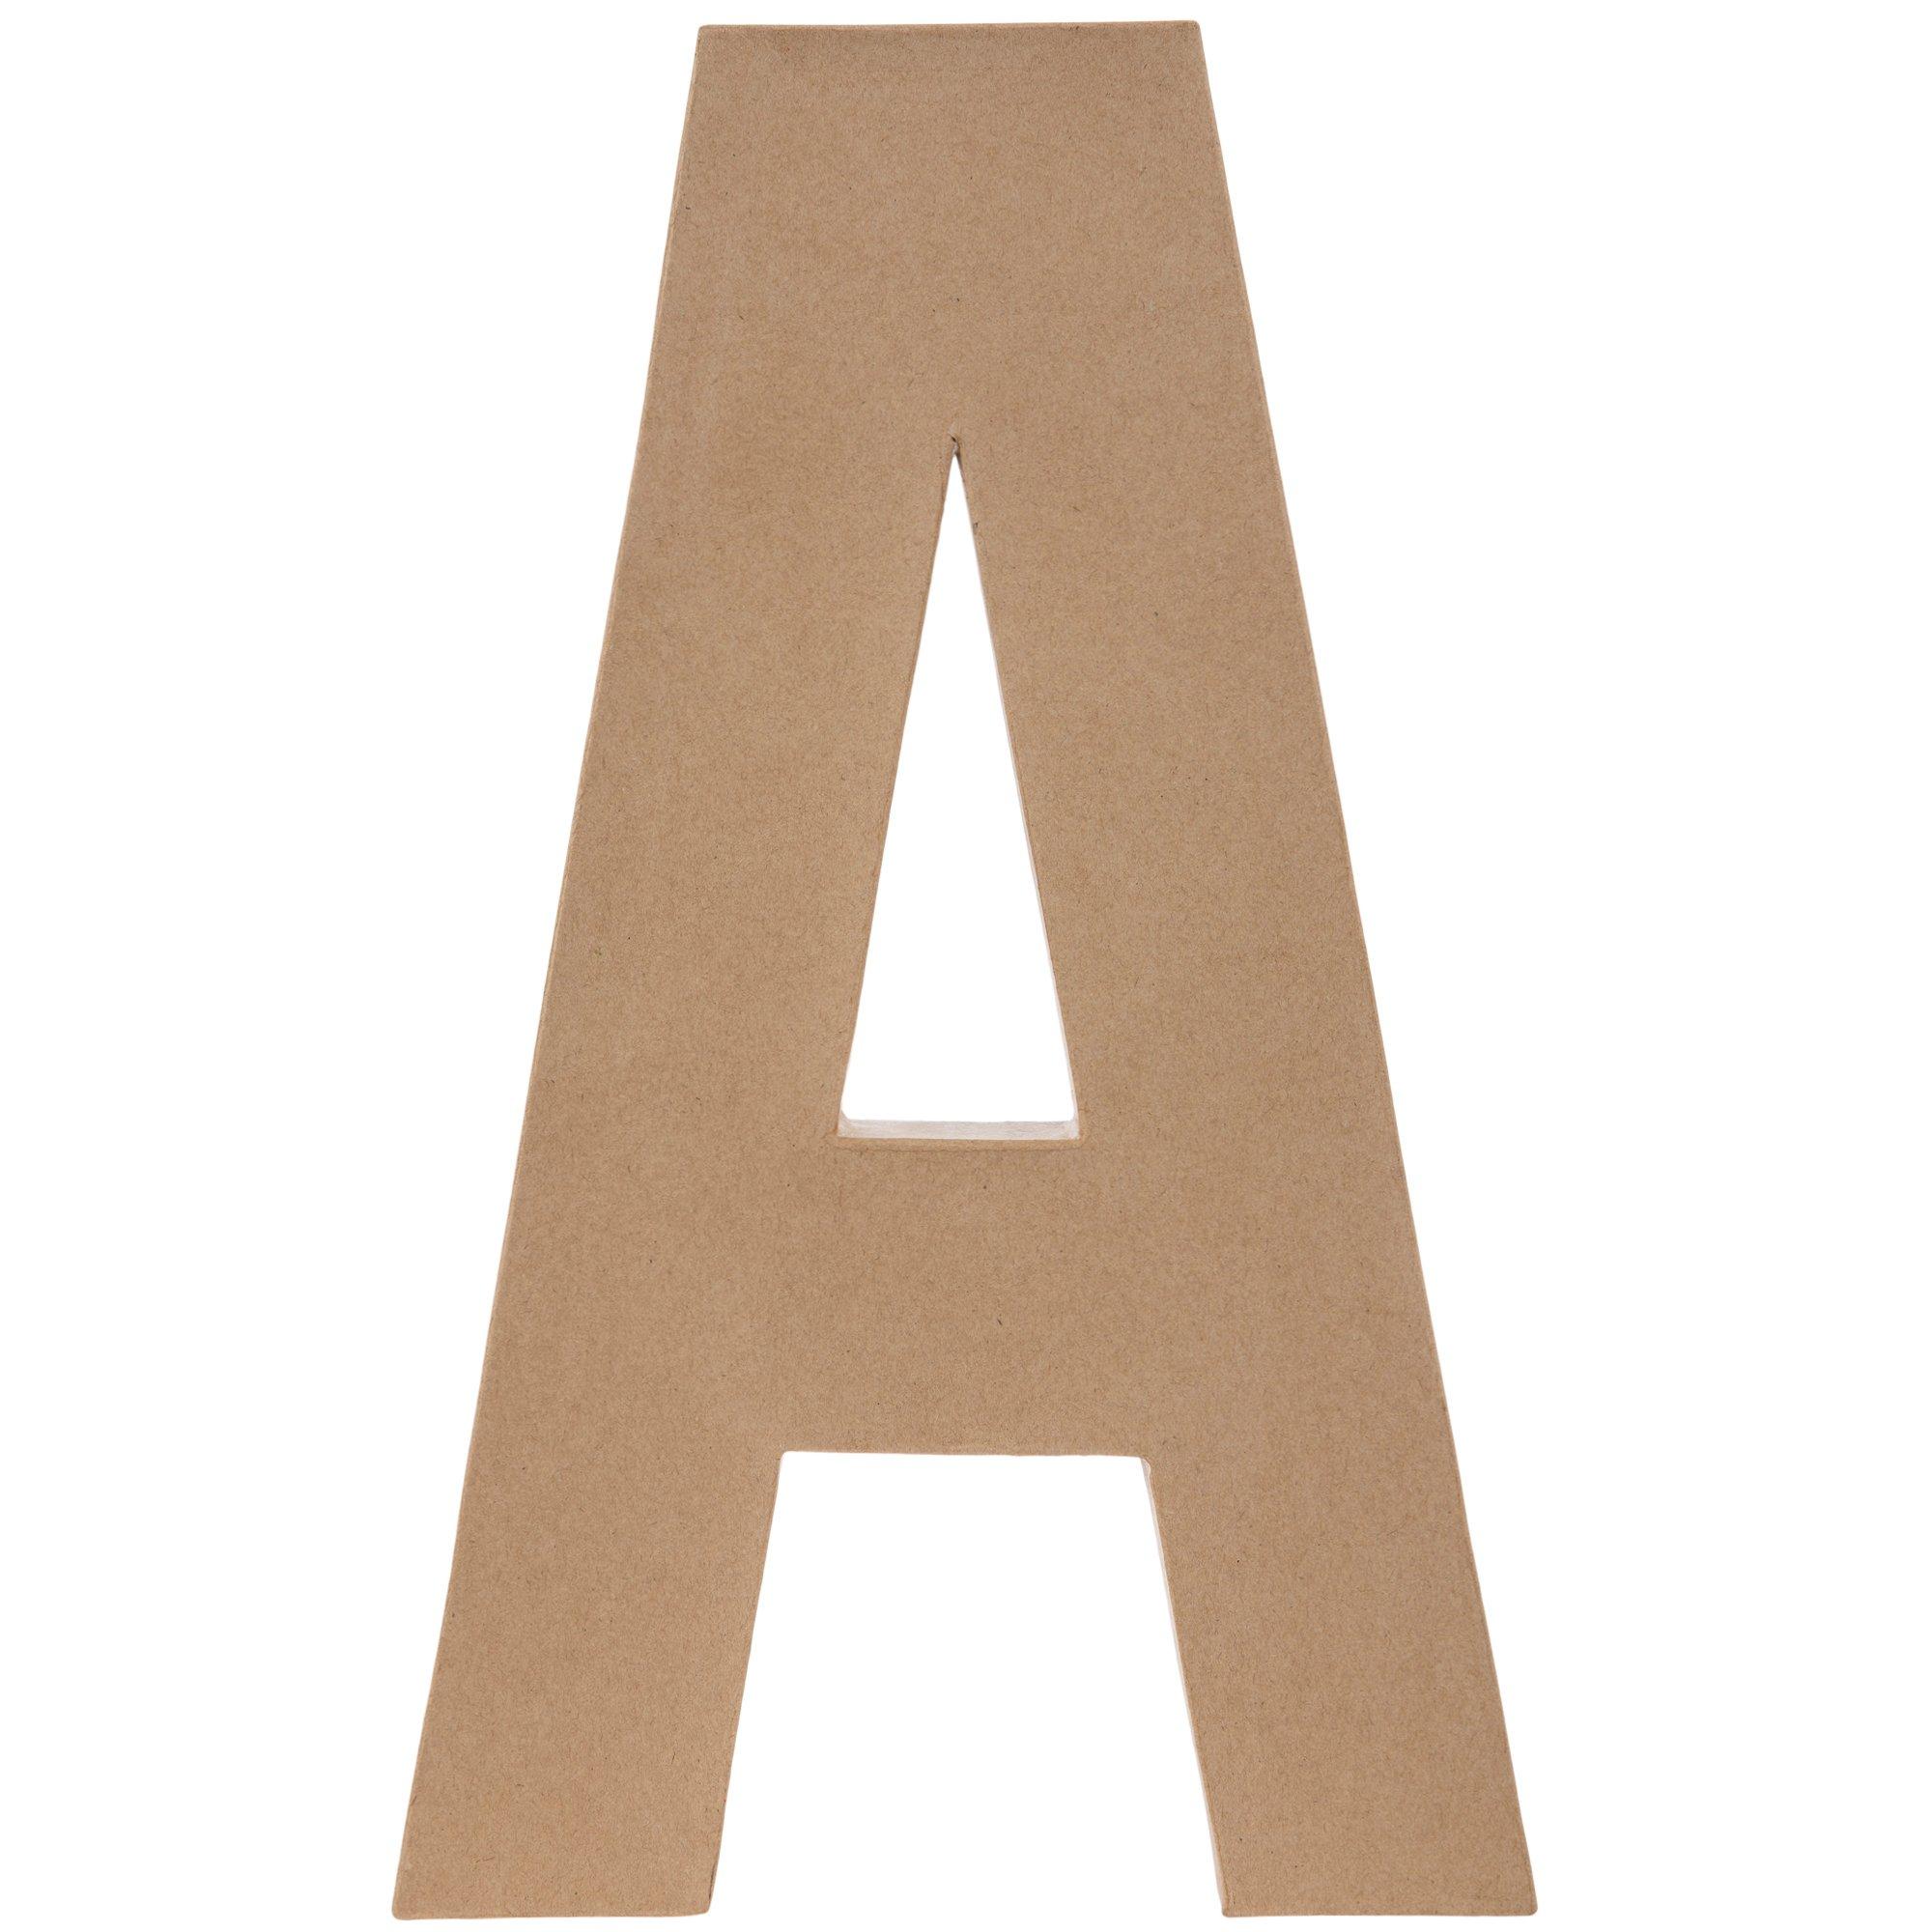 5 Pcs Party Accessory Paper Mache Letters 12 Inch Number Wooden Blank